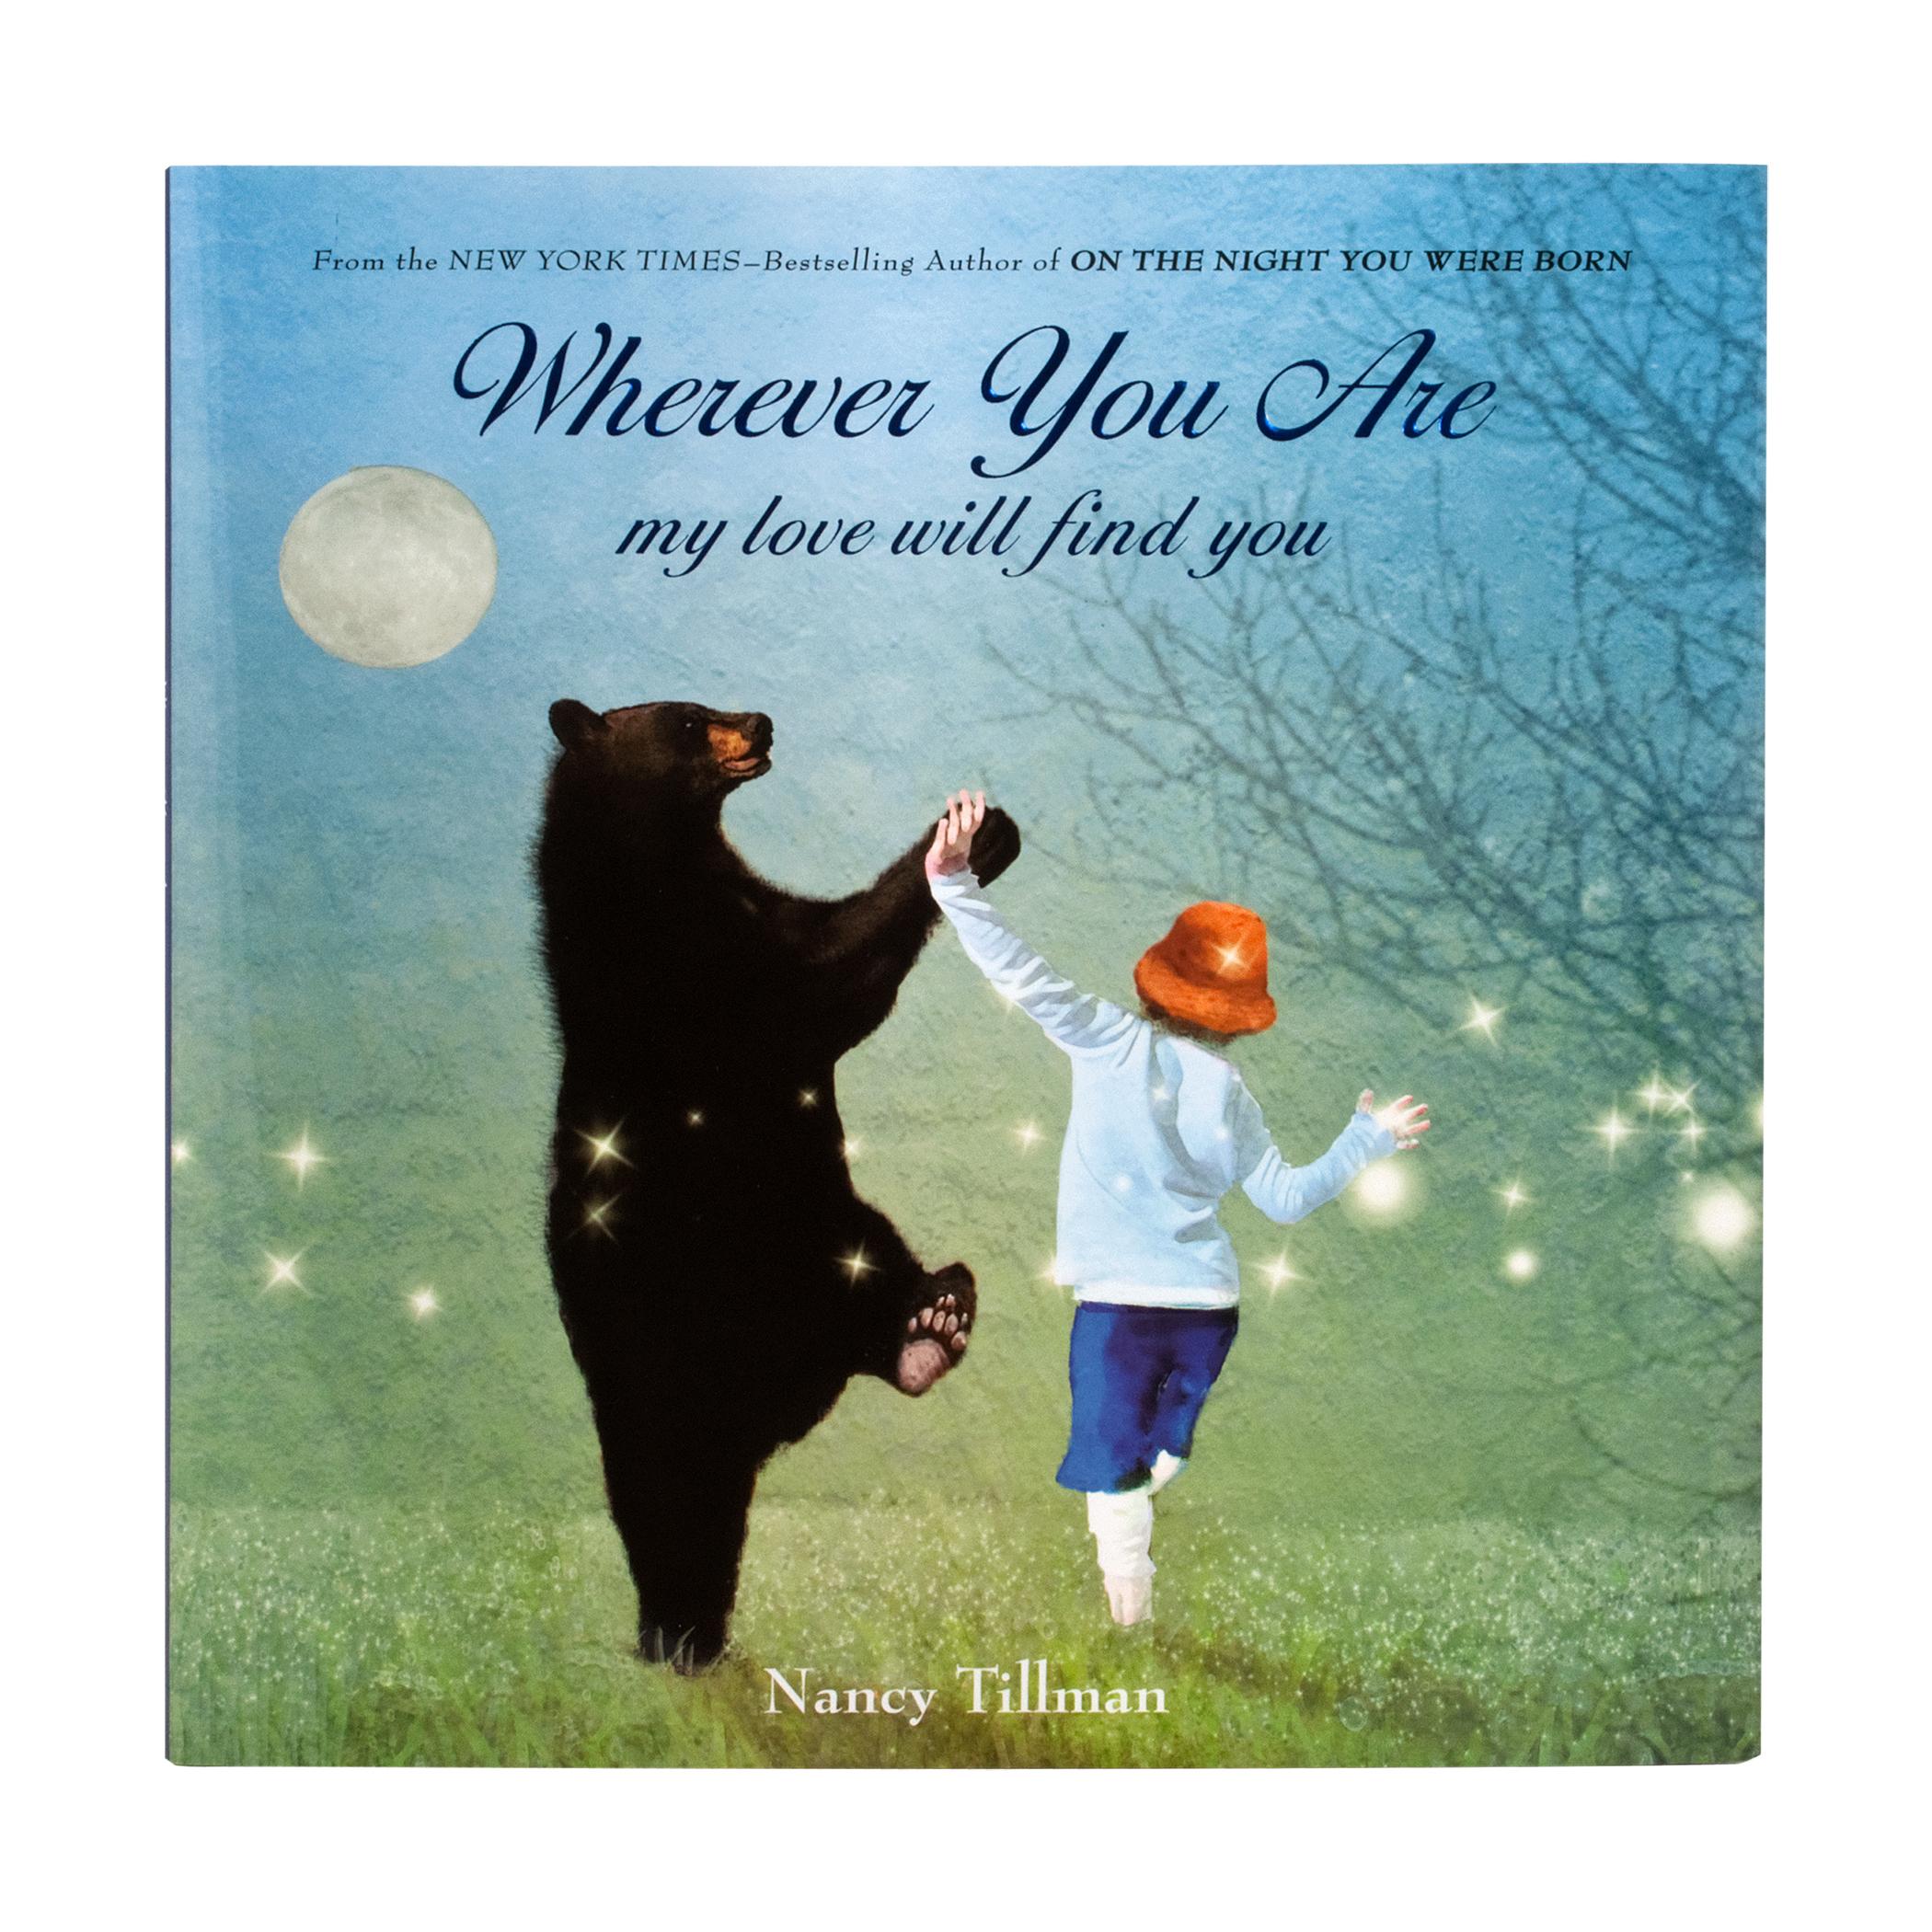 51EFsLMIN8L._SX260_Wherever You Are_book cover.jpg